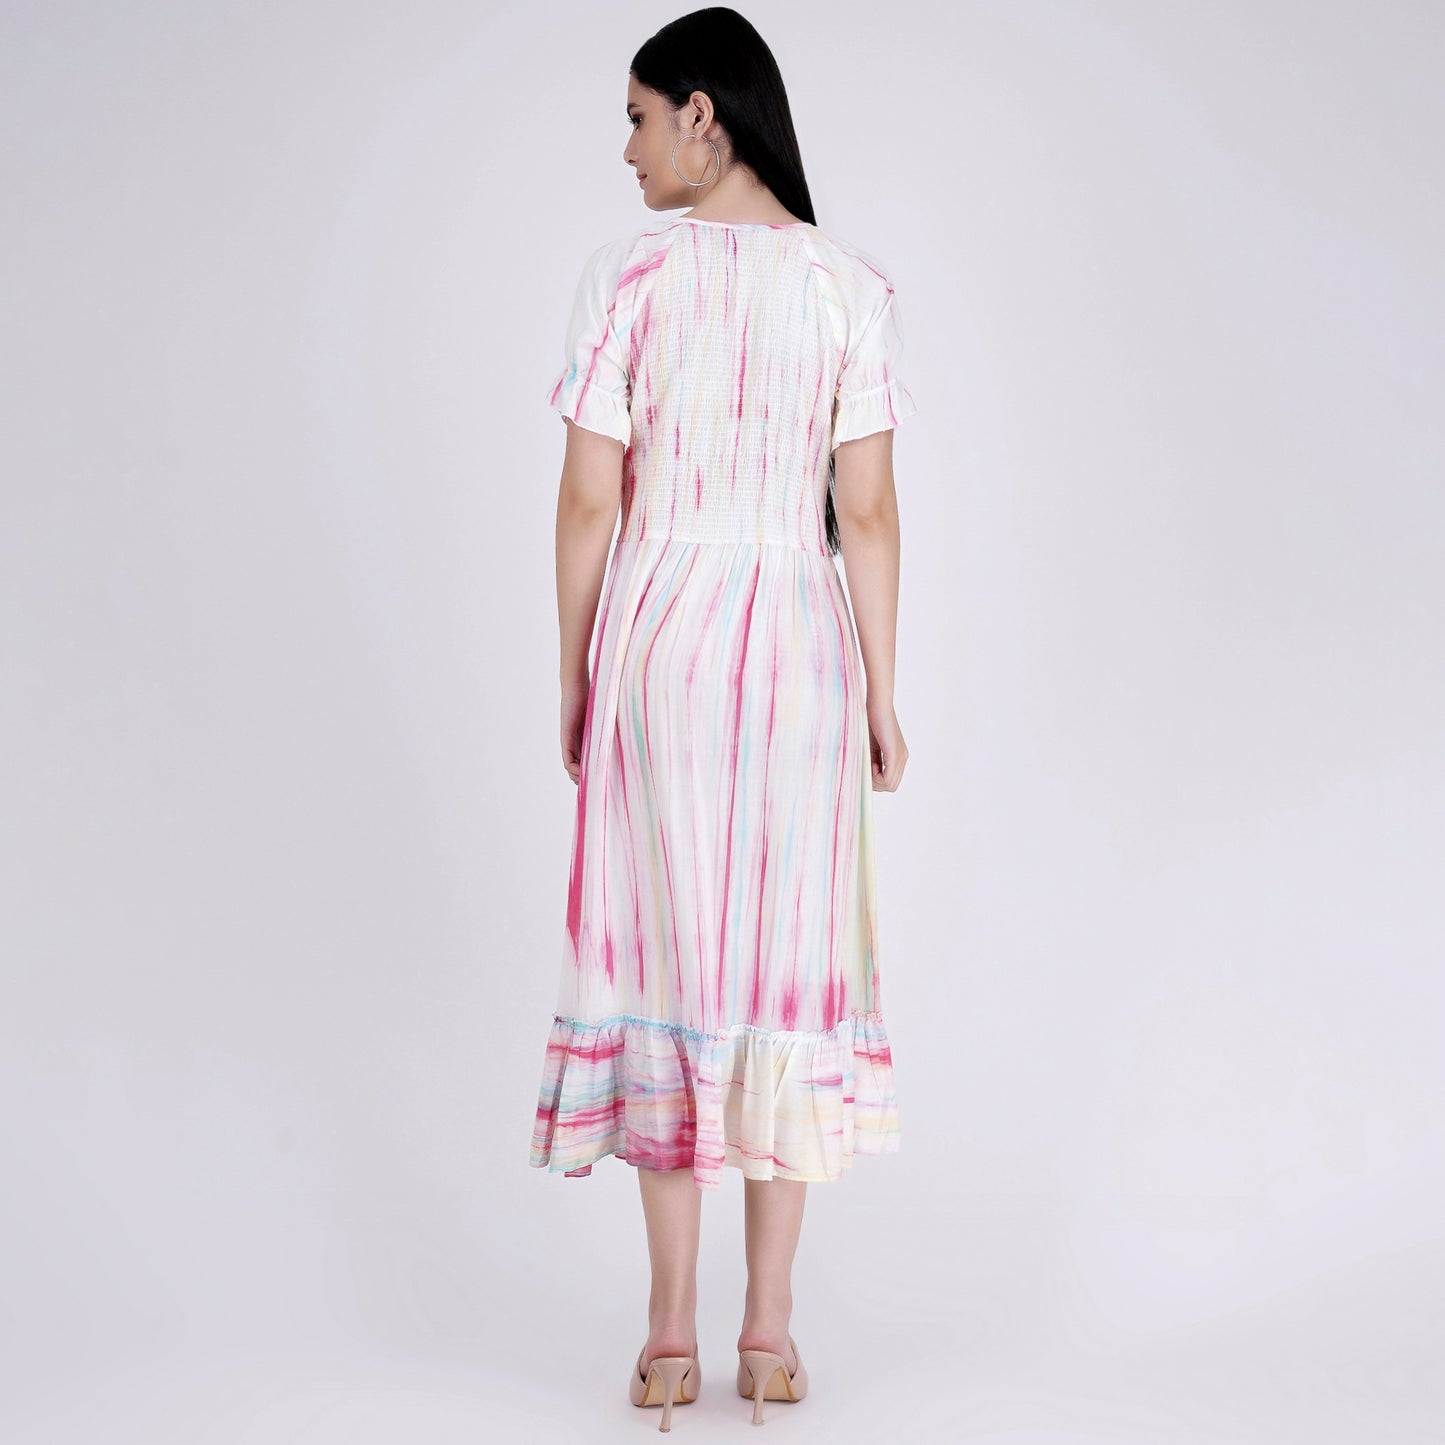 Multicoloured Tie-Dye Smocking Long Dress with Frill